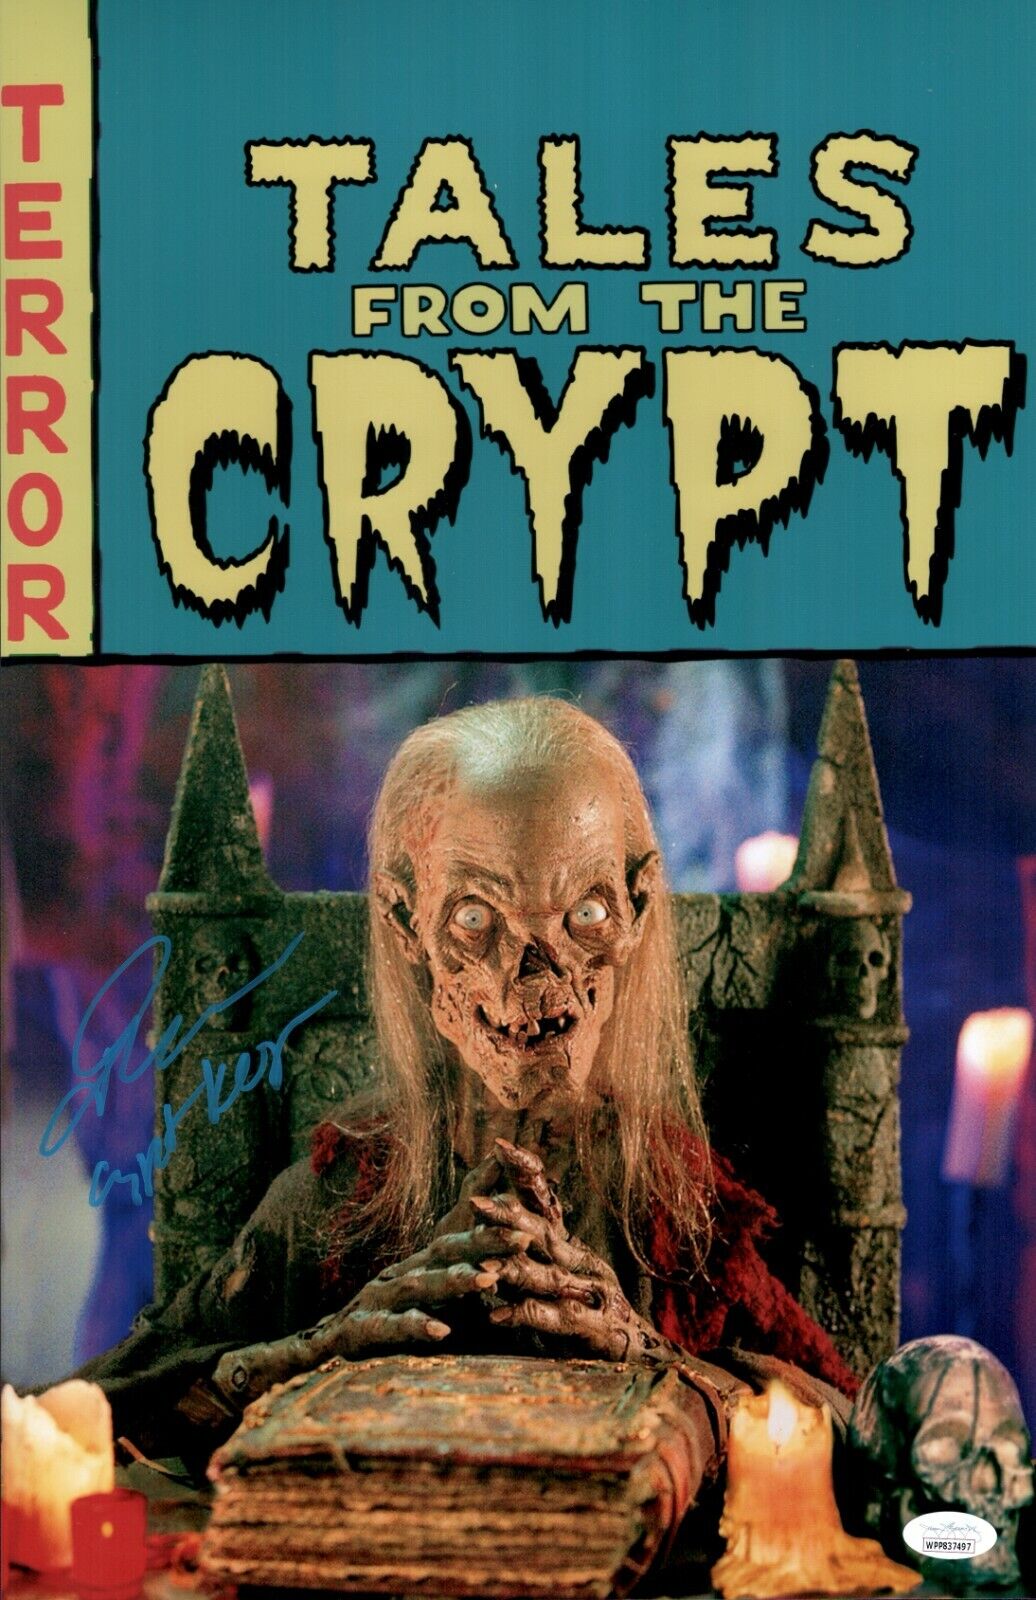 JOHN KASSIR Signed TALES FROM CRYPT Keeper 11x17 Photo Poster painting Autograph JSA COA WP Cert